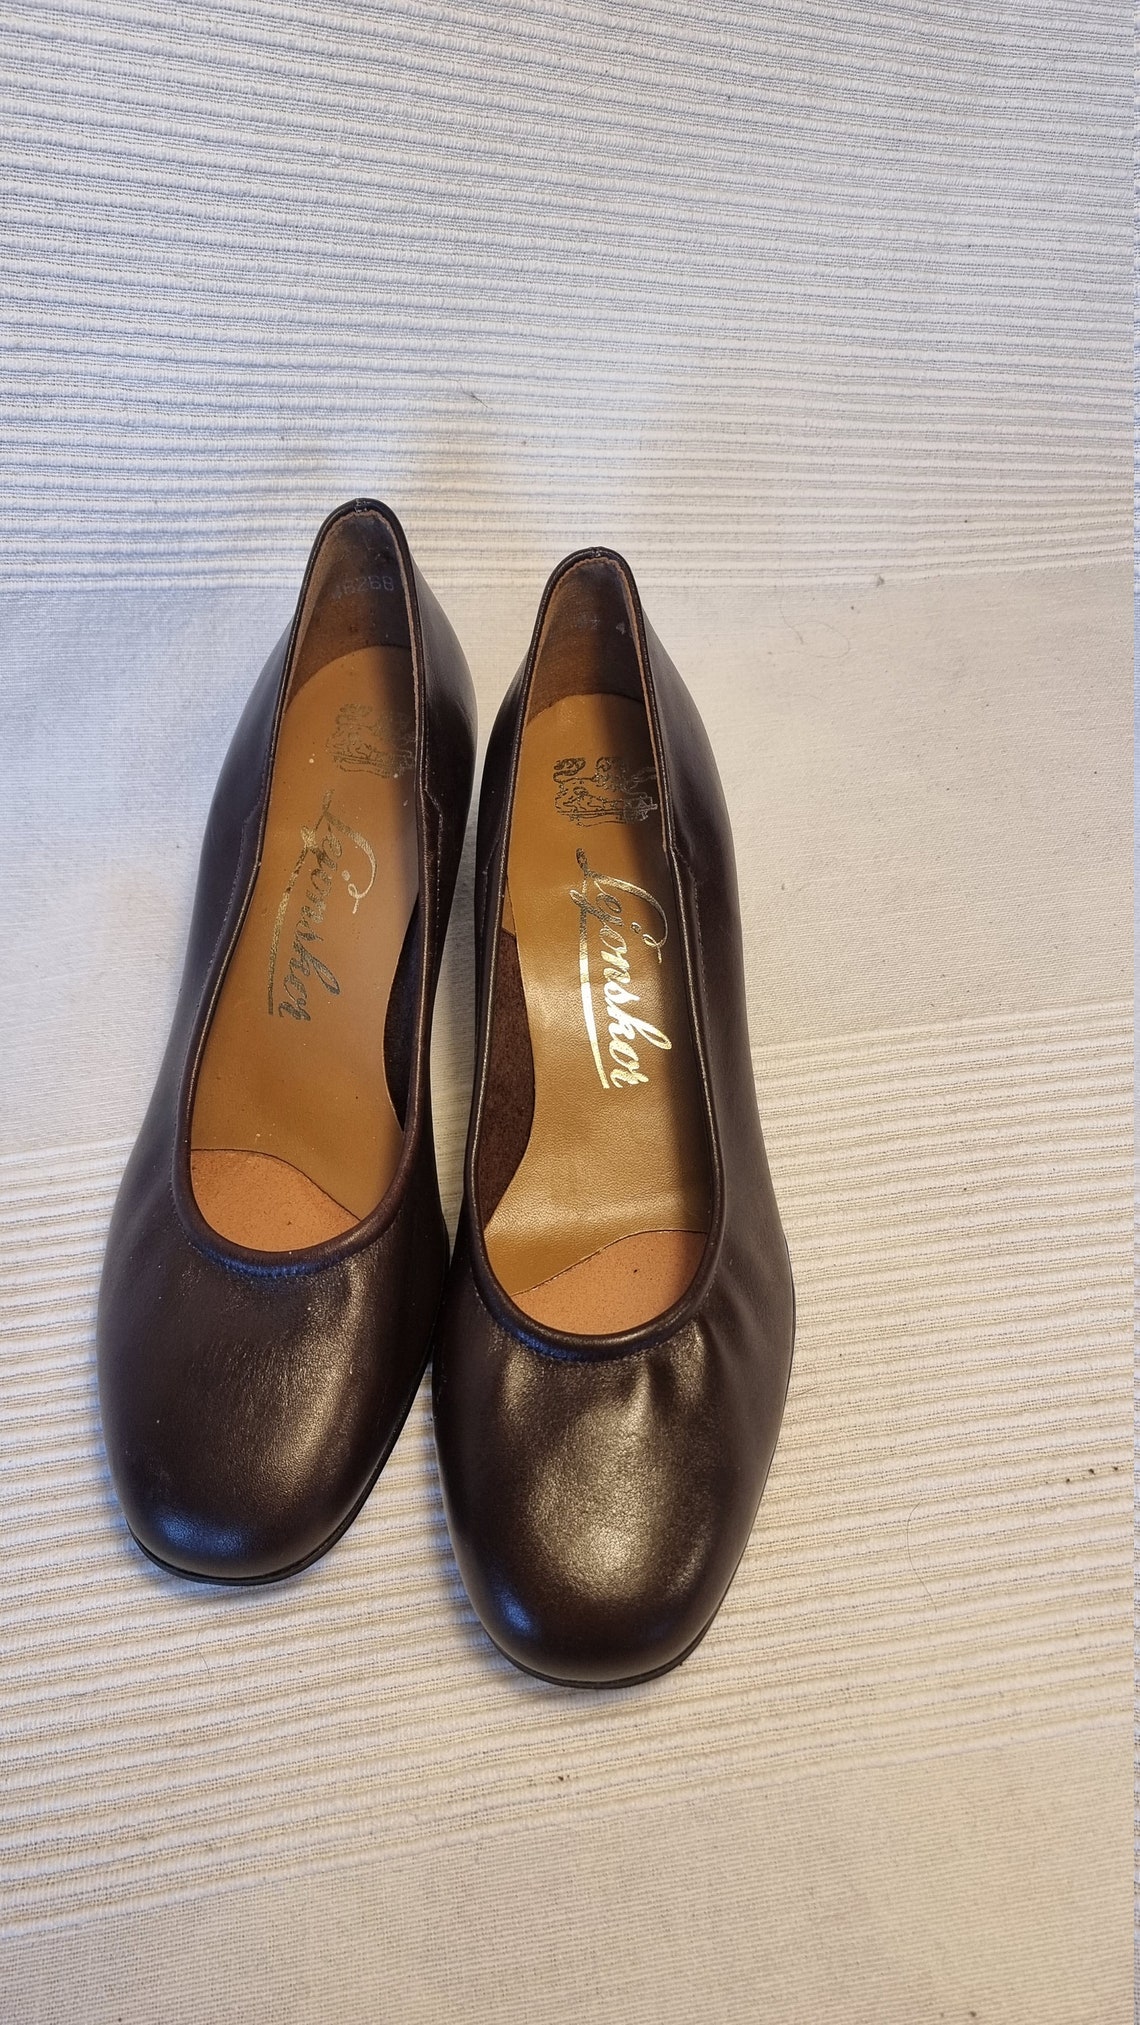 60s Pumps in Black or Brown Available in Sizes UK Between 4.5 | Etsy